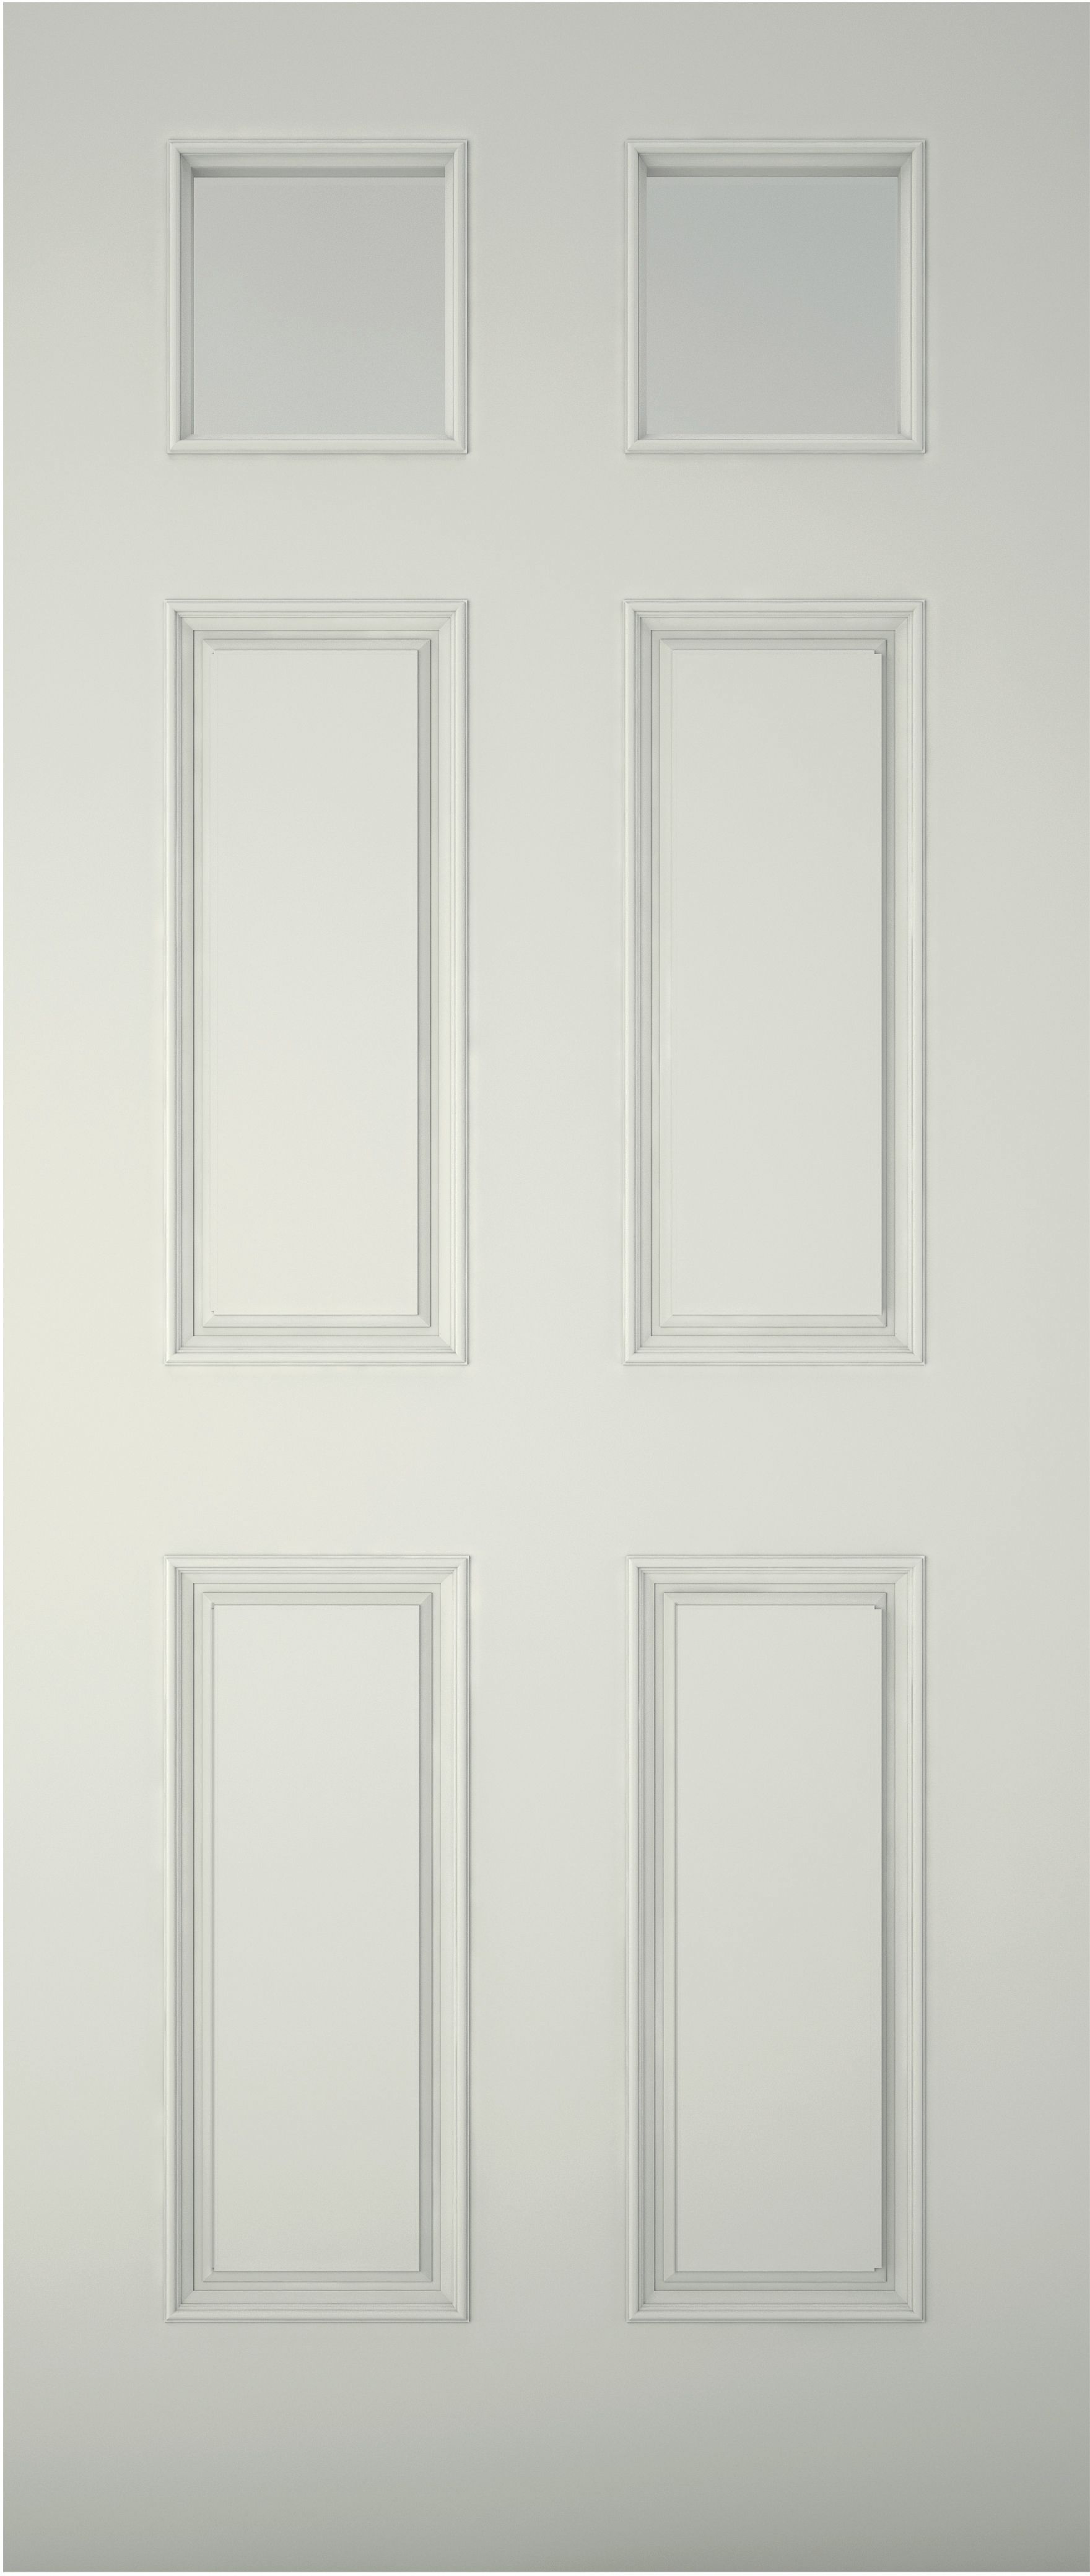 6 panel Frosted Glazed White LH & RH External Front Door set, (H)2074mm (W)856mm